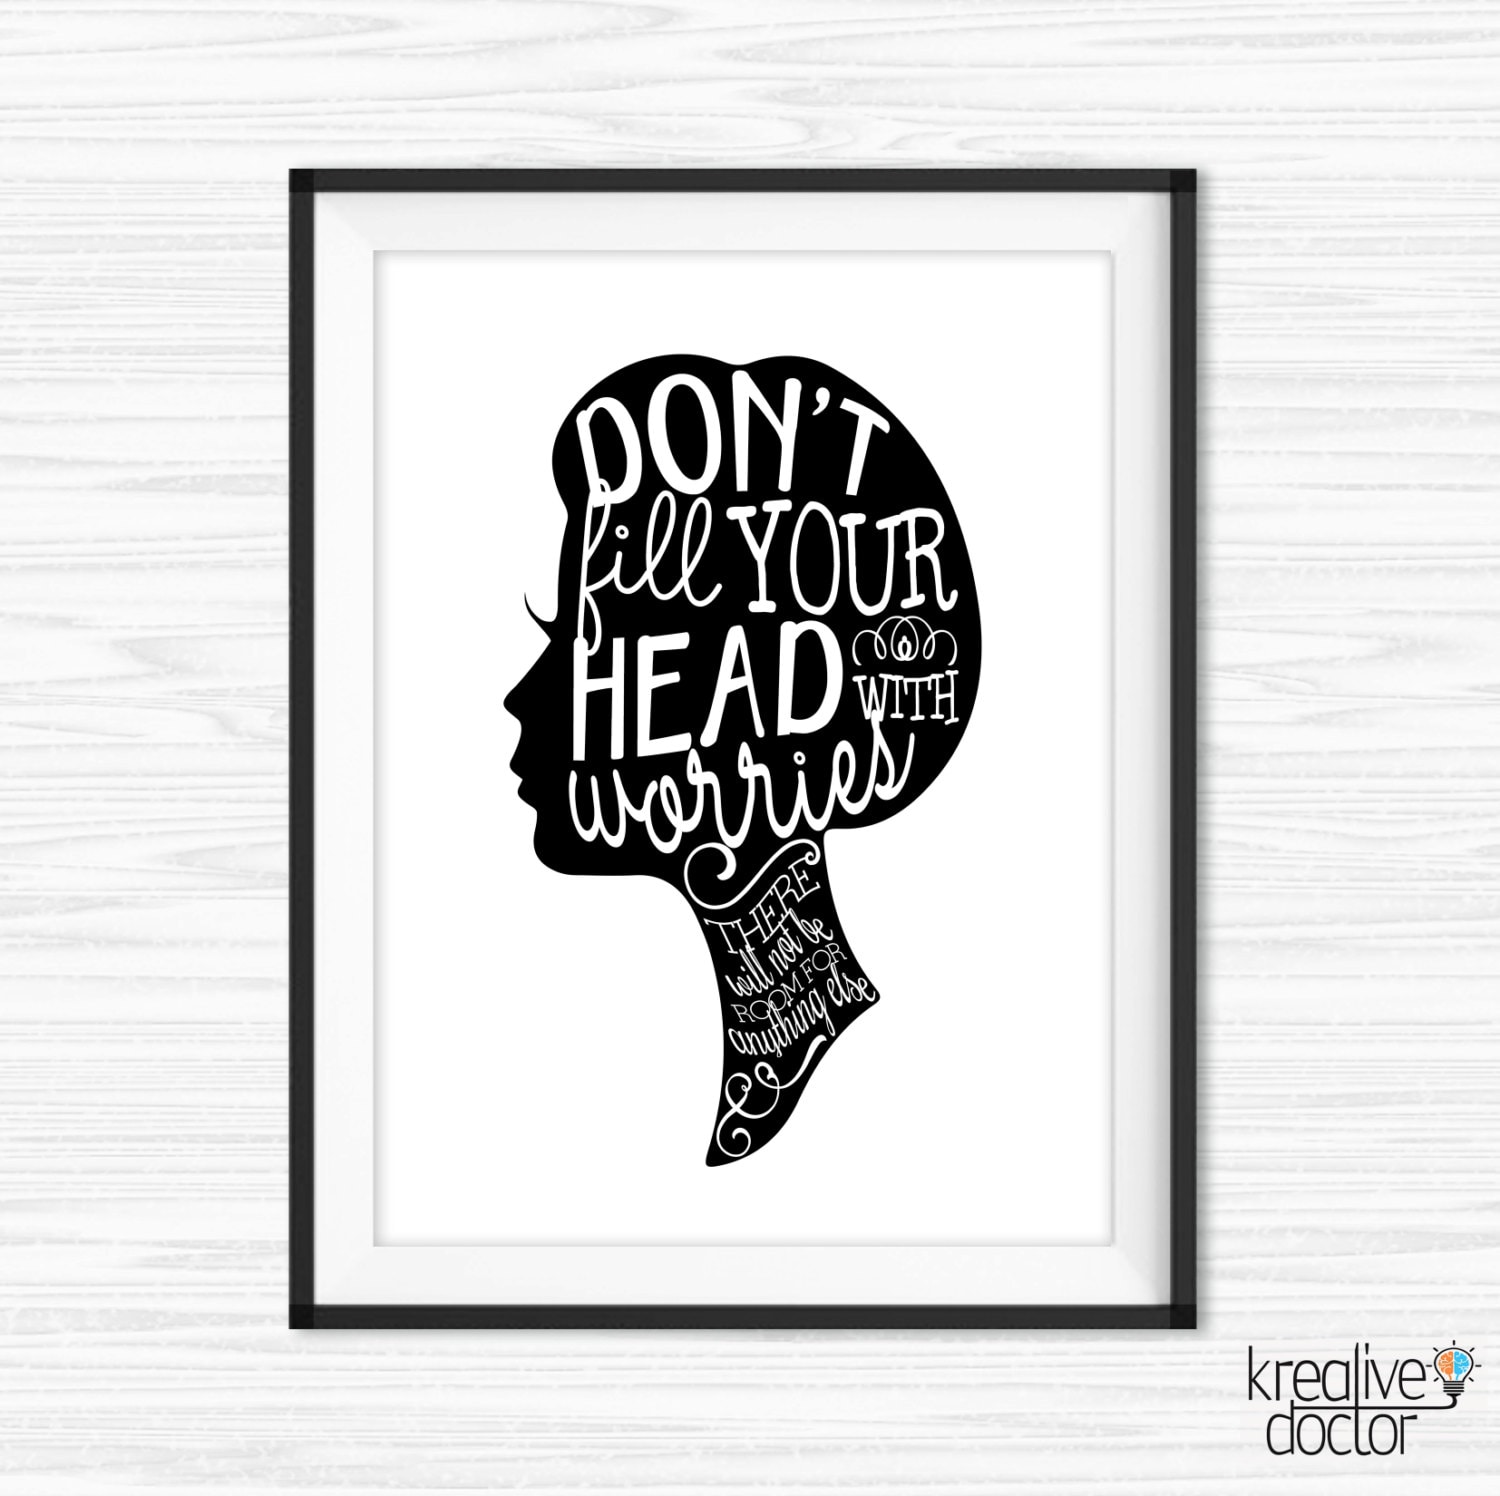 Inspirational Quotes Wall Art For Office - artql